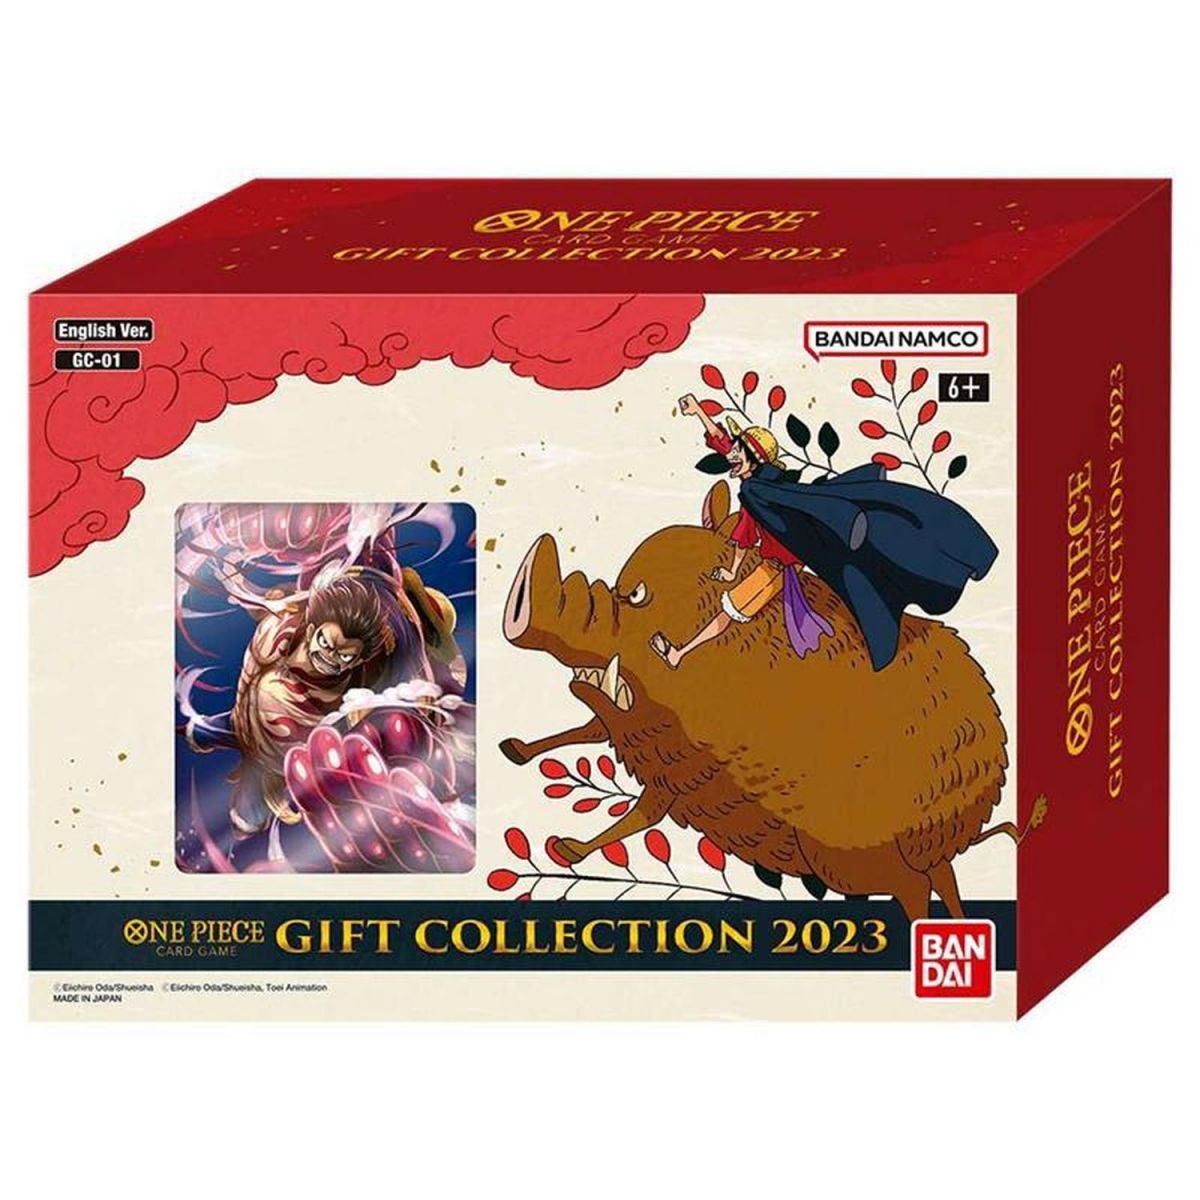 Item One Piece CG - Coffret - Gift Collection 2023 - Kingdoms of Intrigue OP-04 - EN